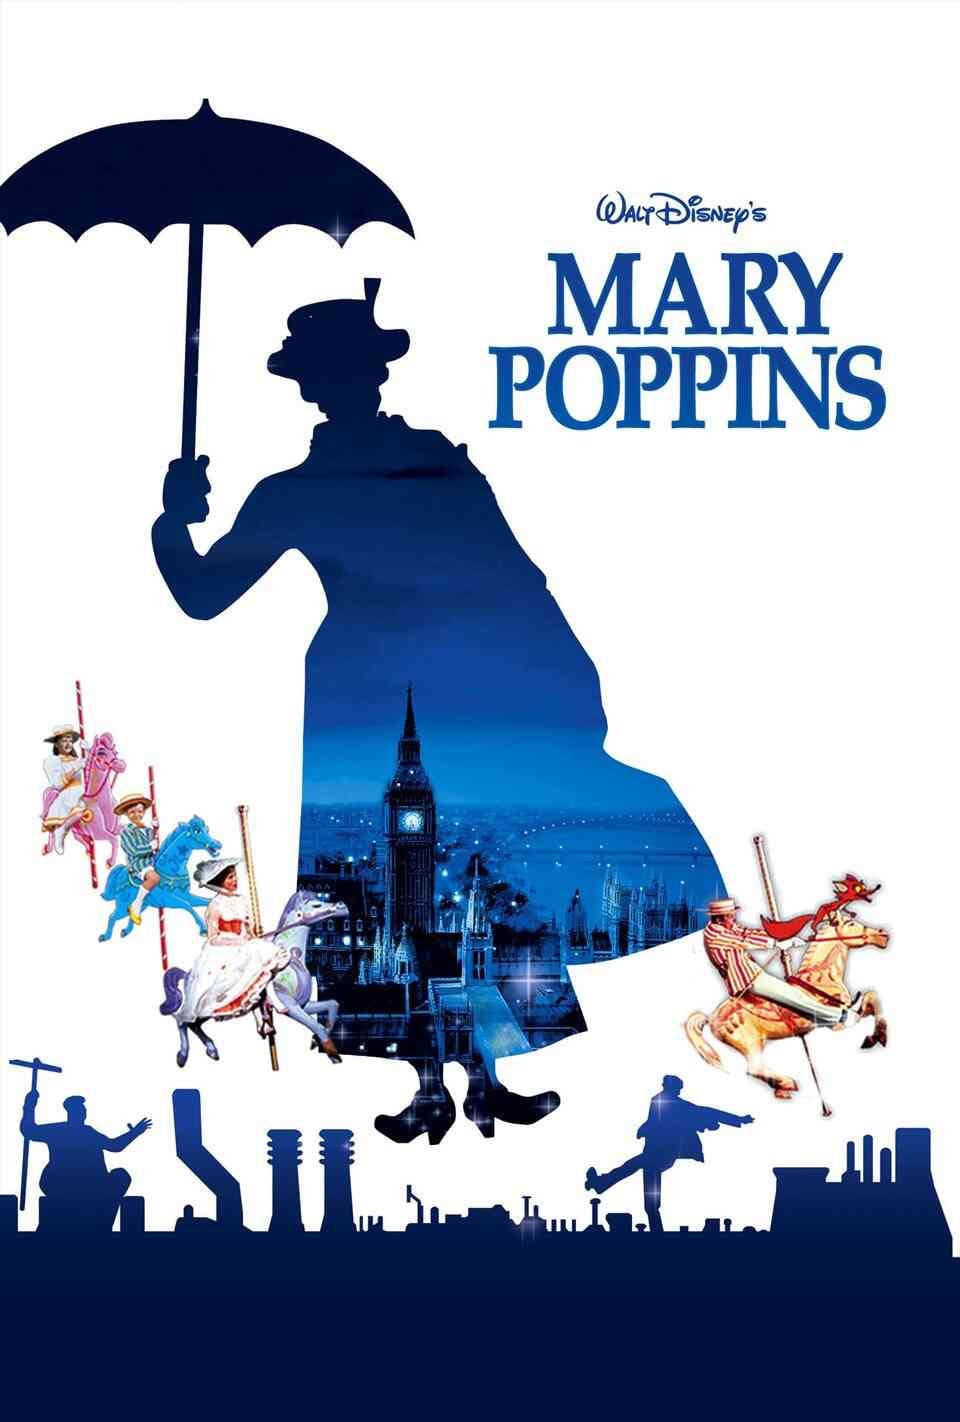 Read Mary Poppins screenplay (poster)